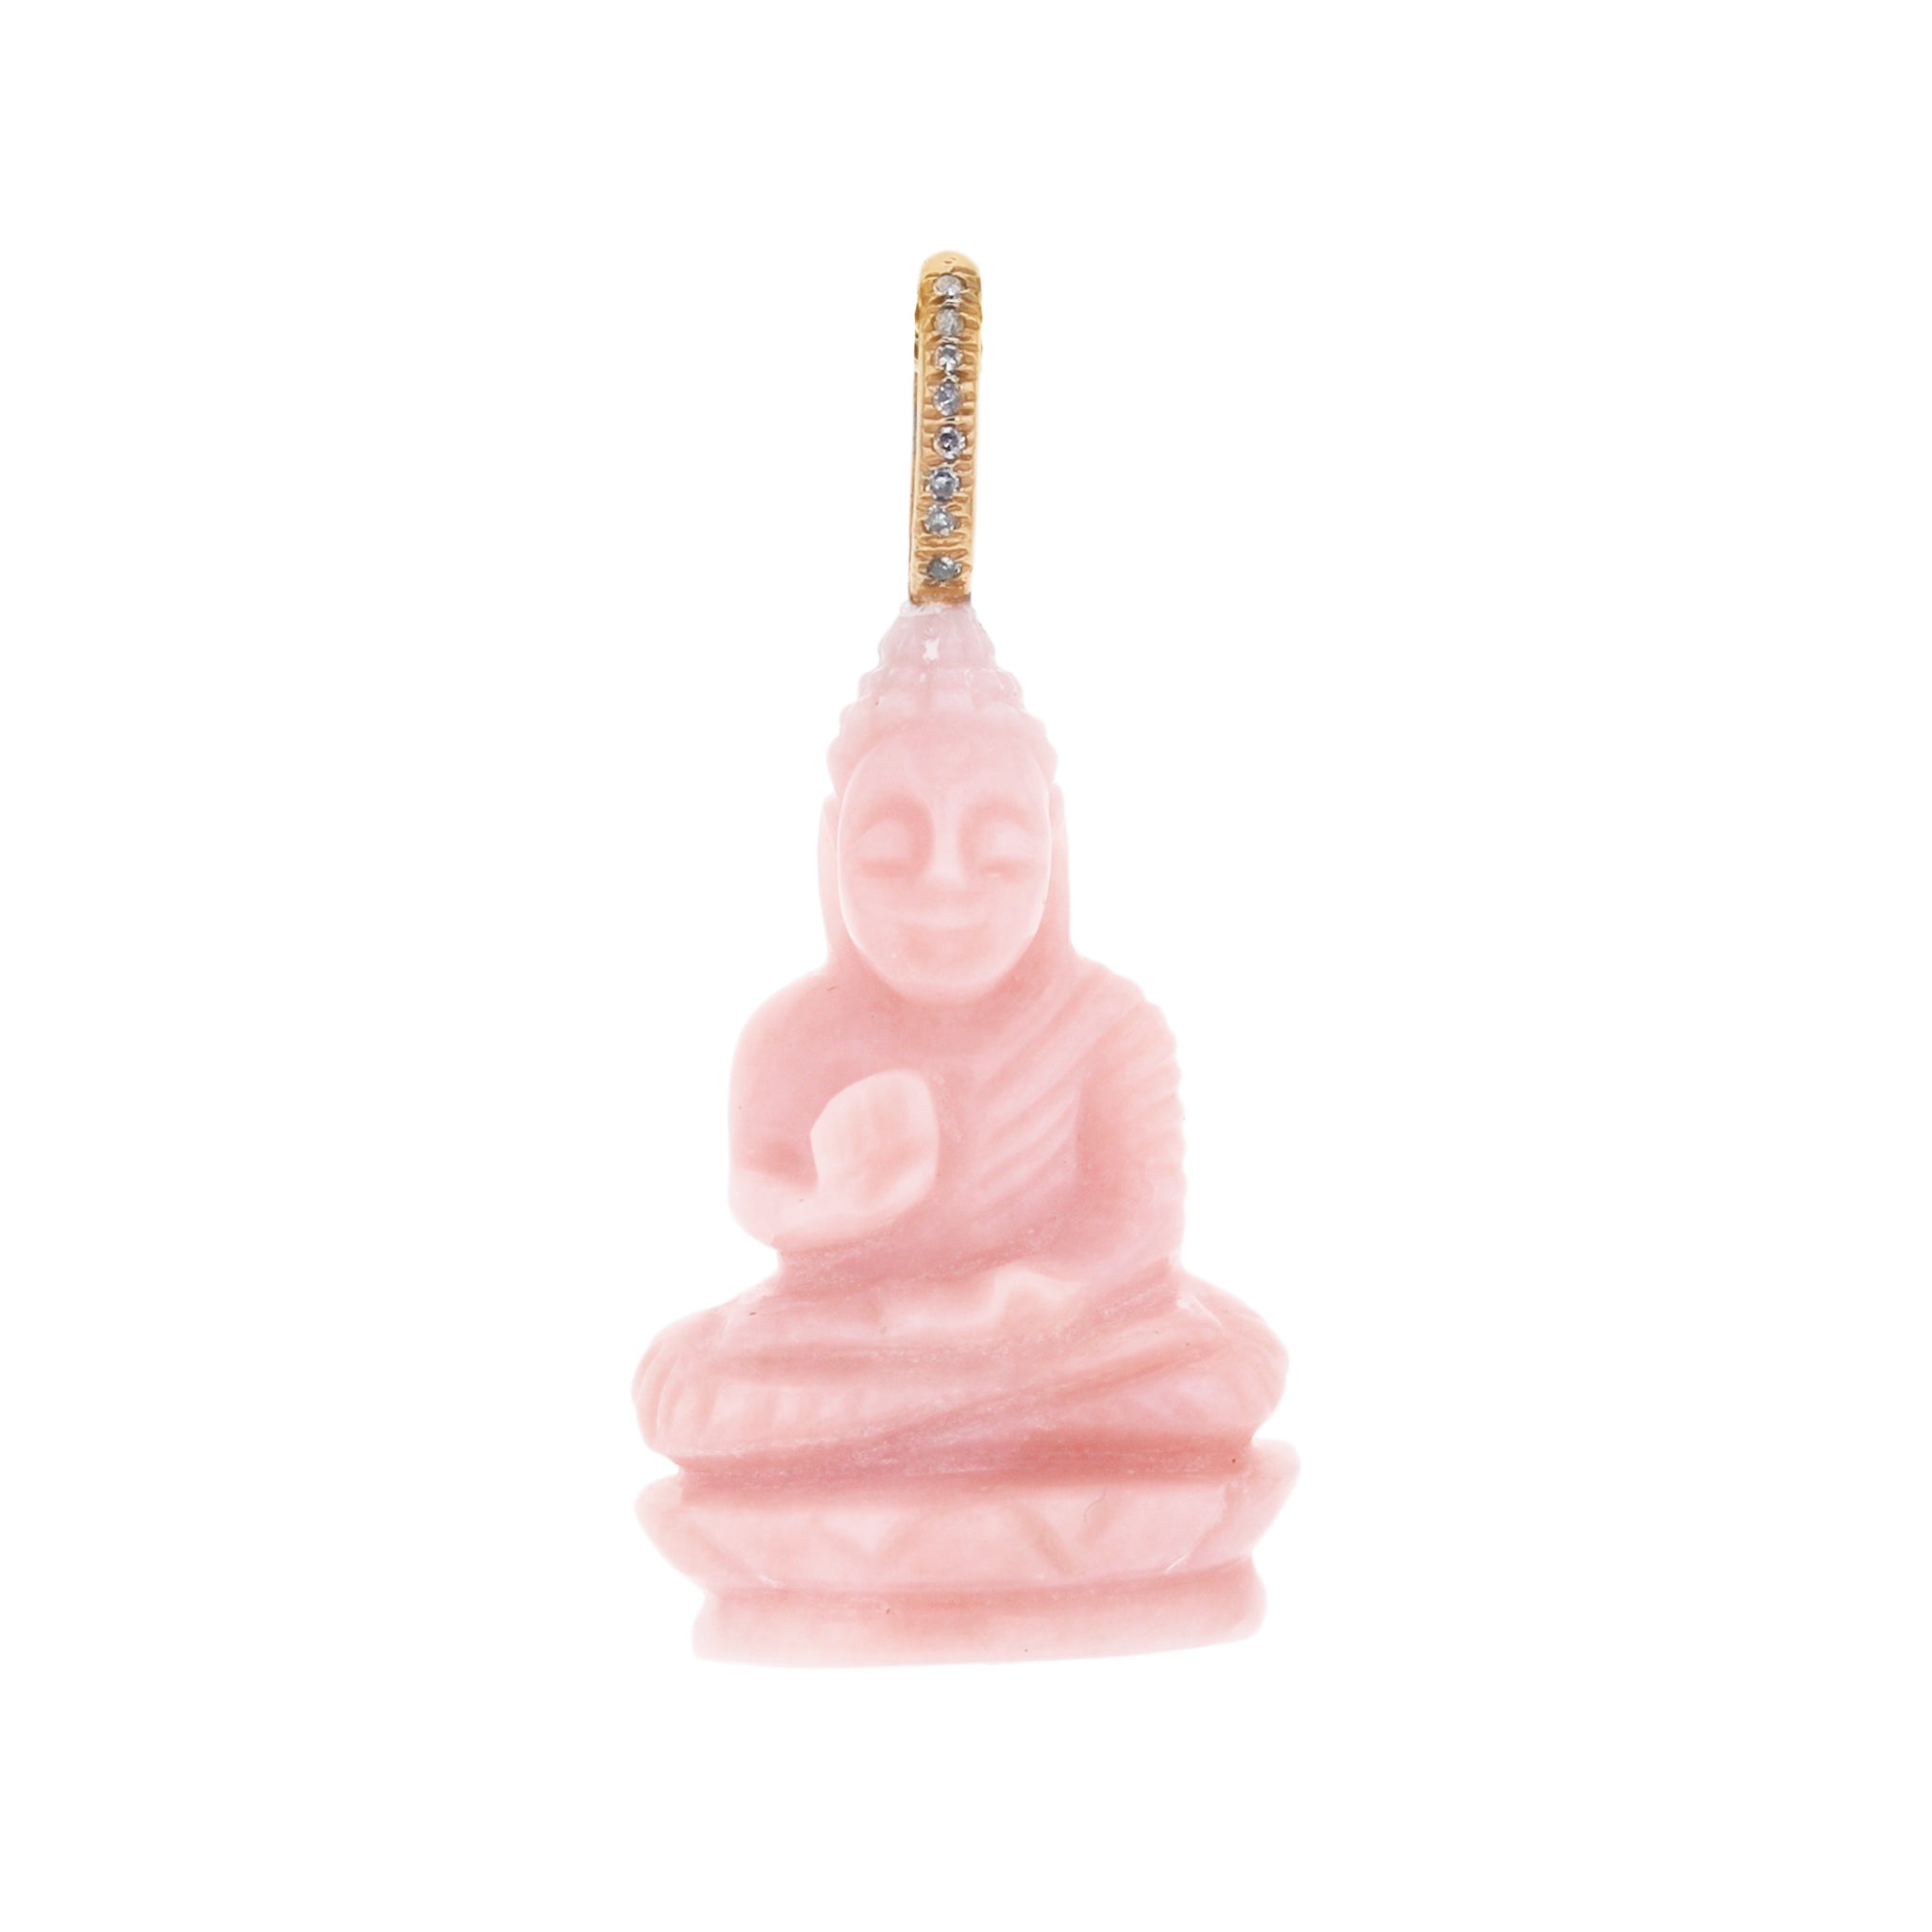 Just Jules Small Bale with Pink Buddha Pendant - Be On Park